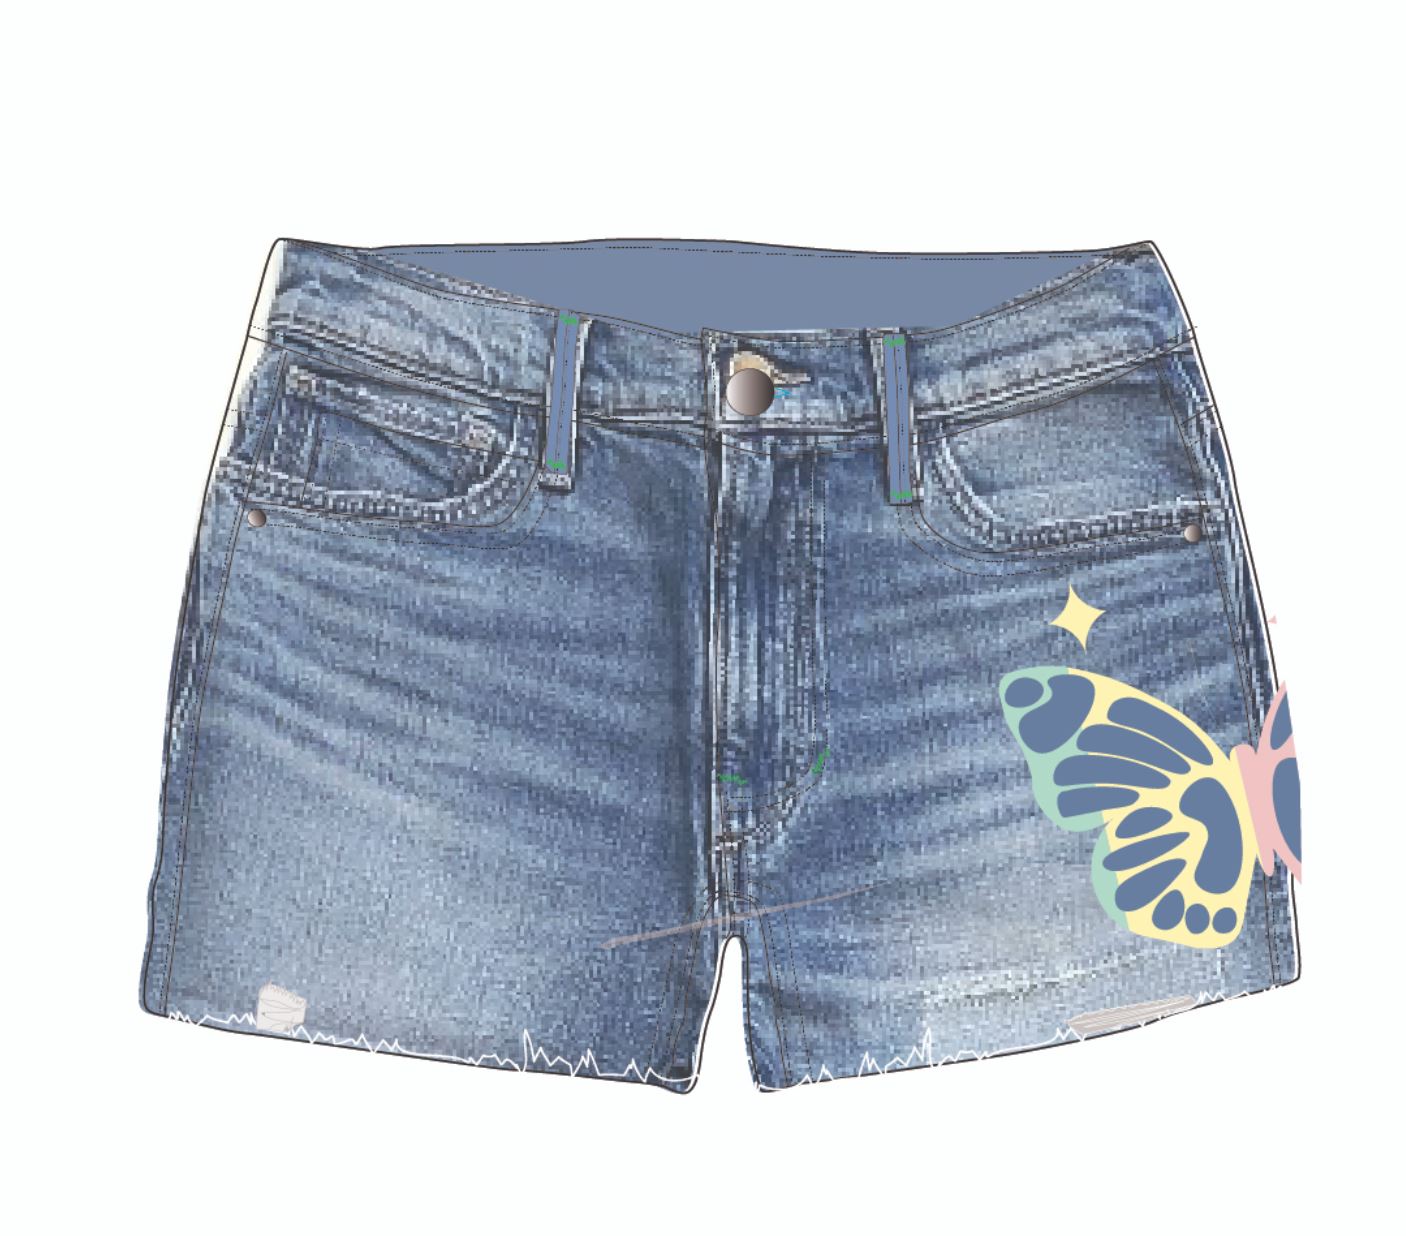 Butterfly Embroidery High Rise Shorts 160 GIRLS APPAREL TWEEN 7-16 Tractr 7 